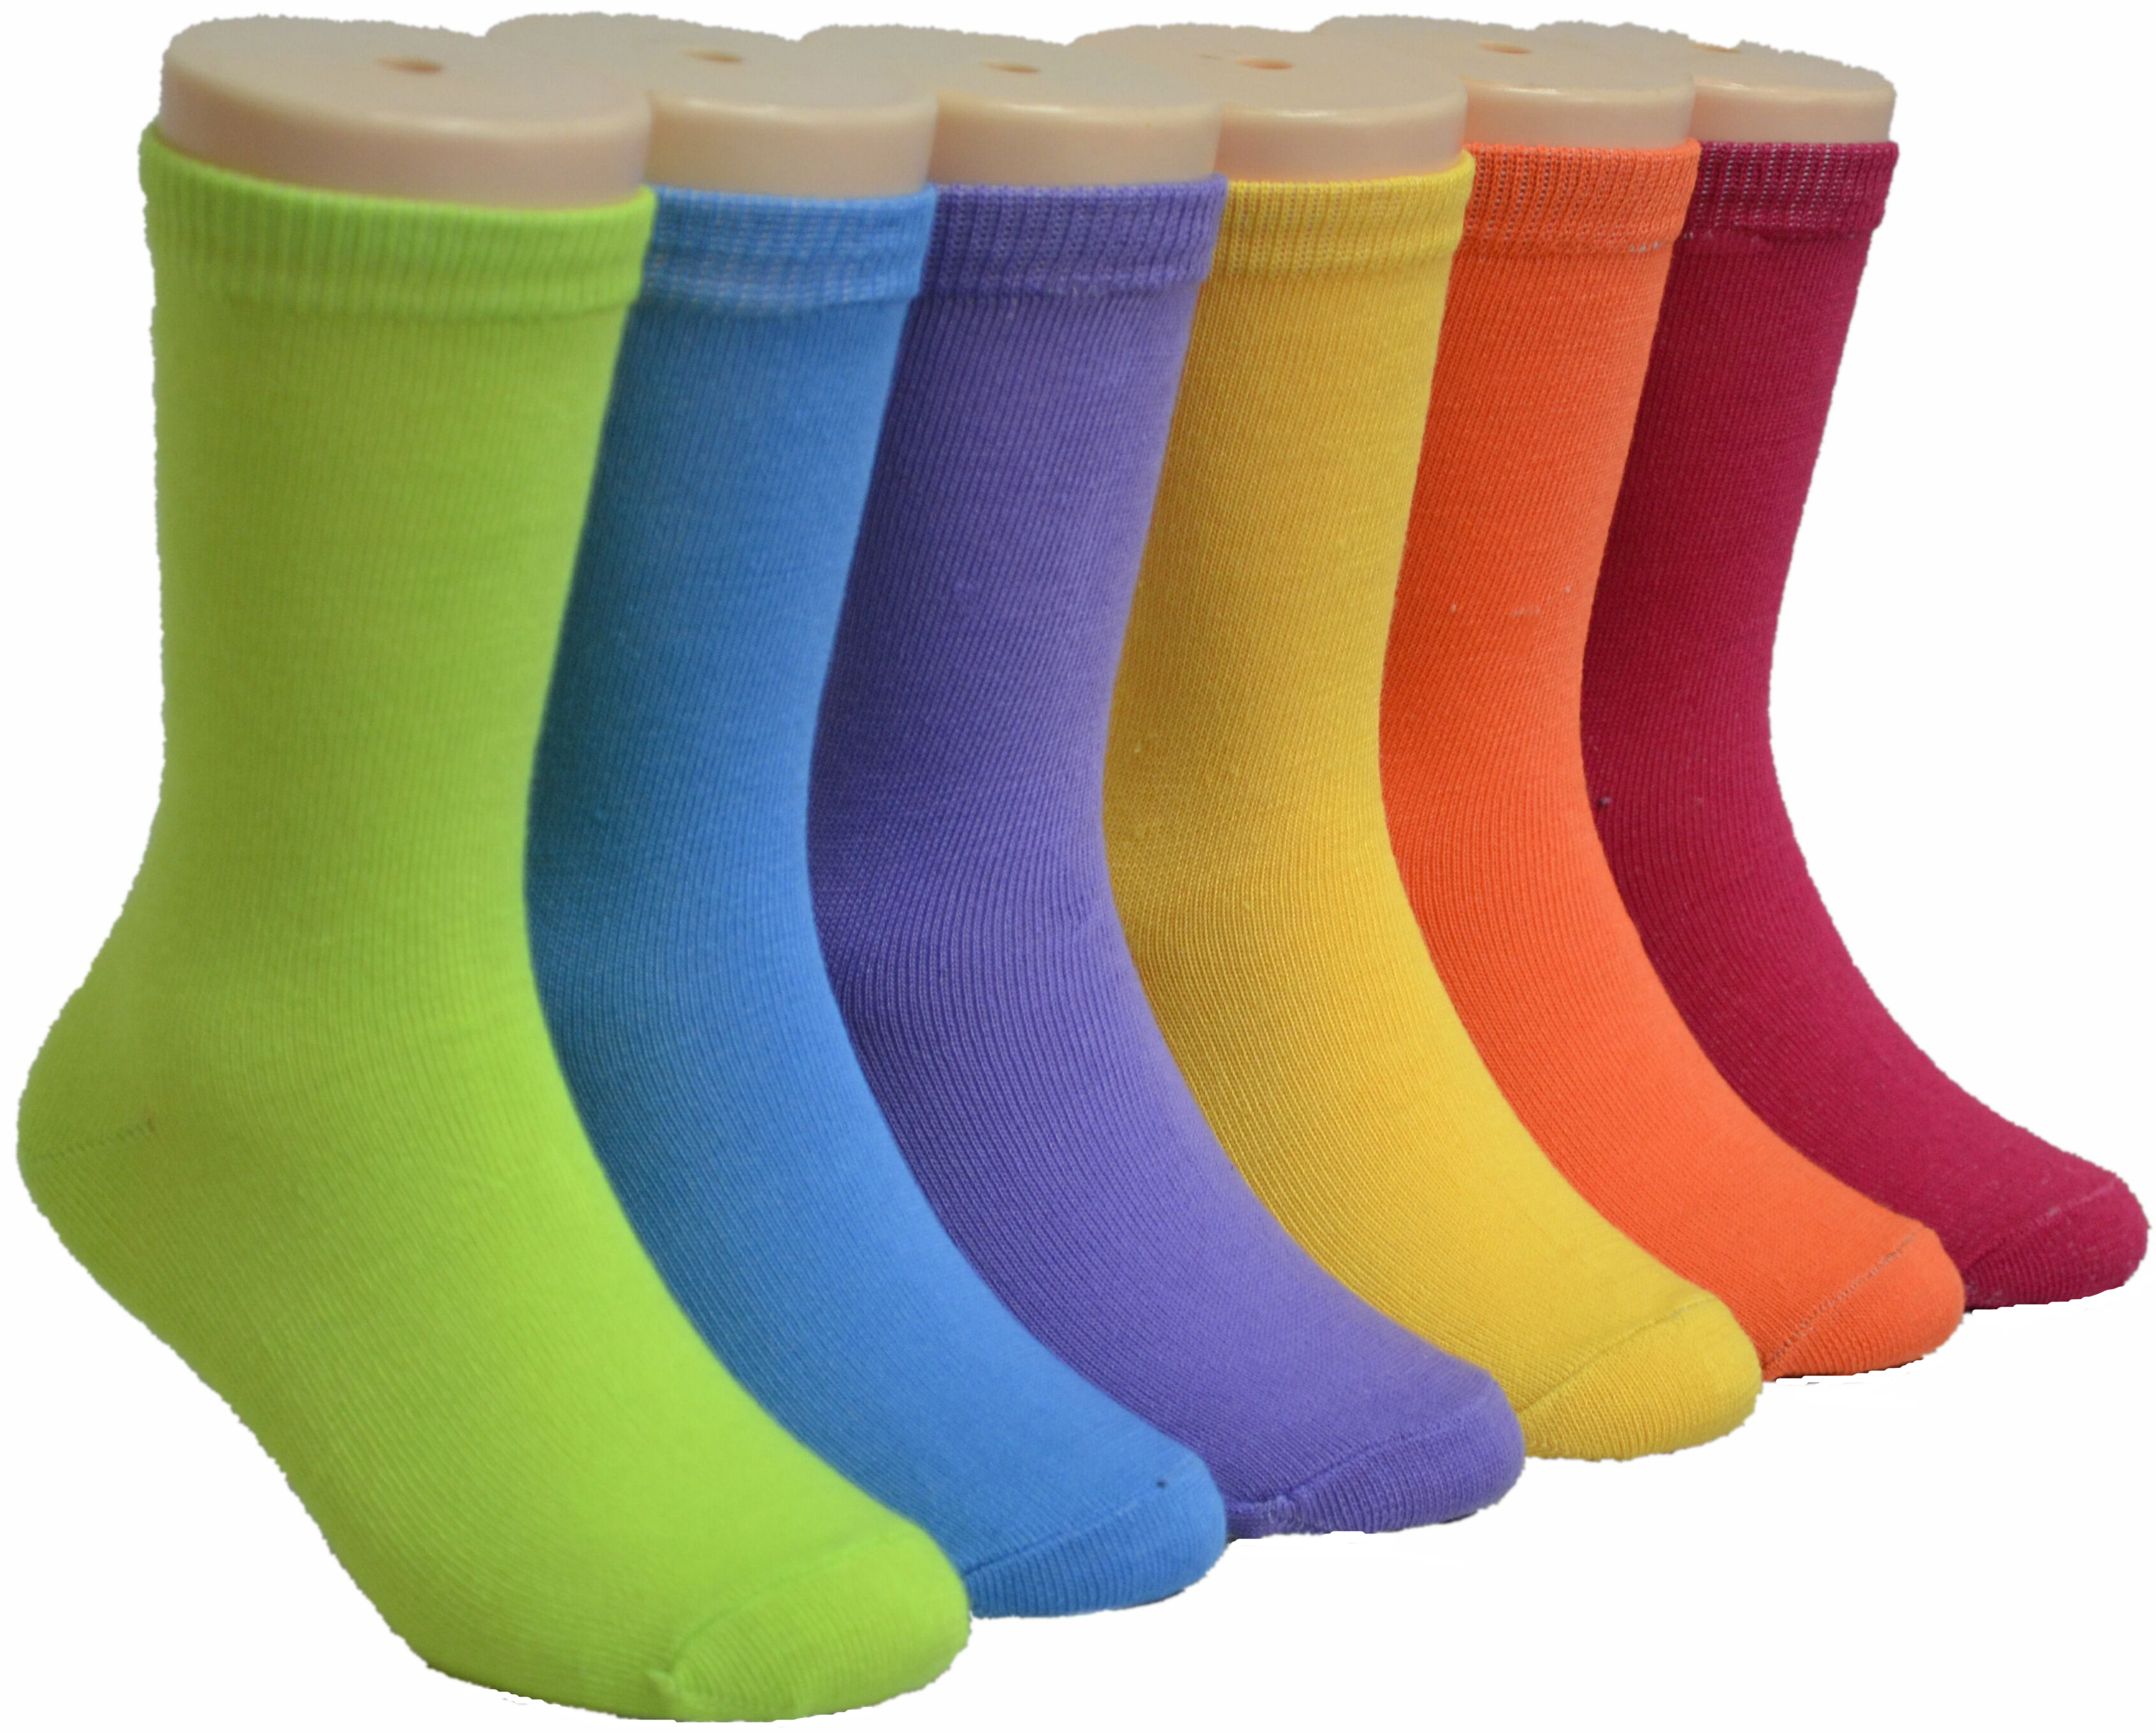 Boy's & Girl's Novelty Crew Socks - Solid Colors - Size 6-8